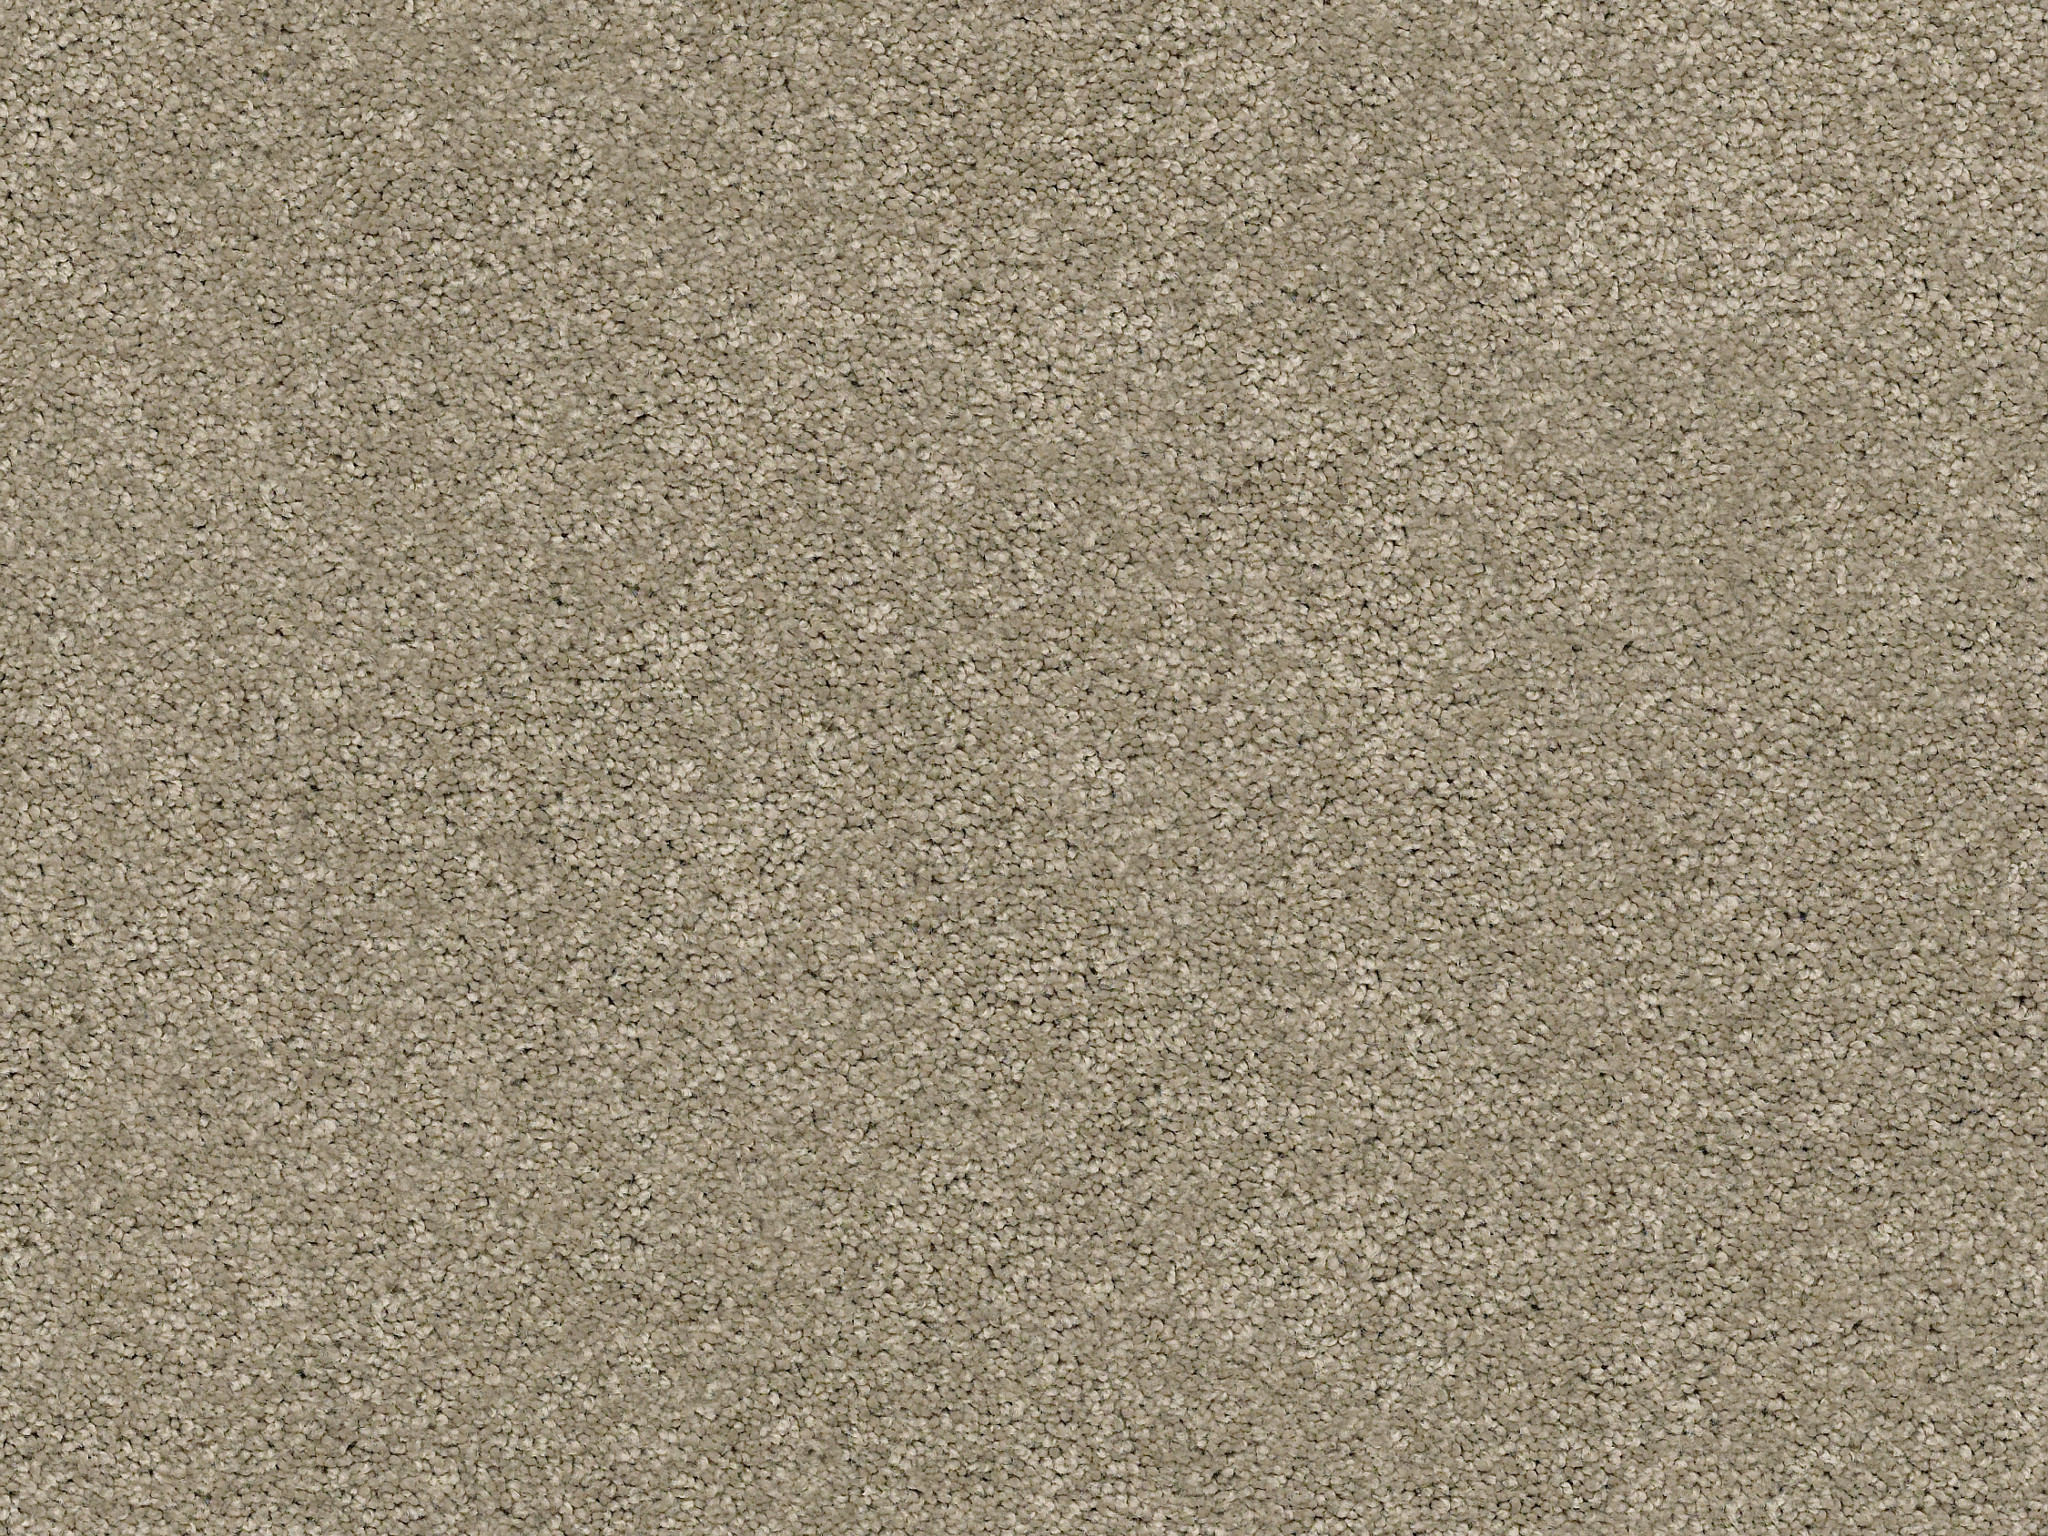 First Act Carpet - Imperial Zoomed Swatch Thumbnail